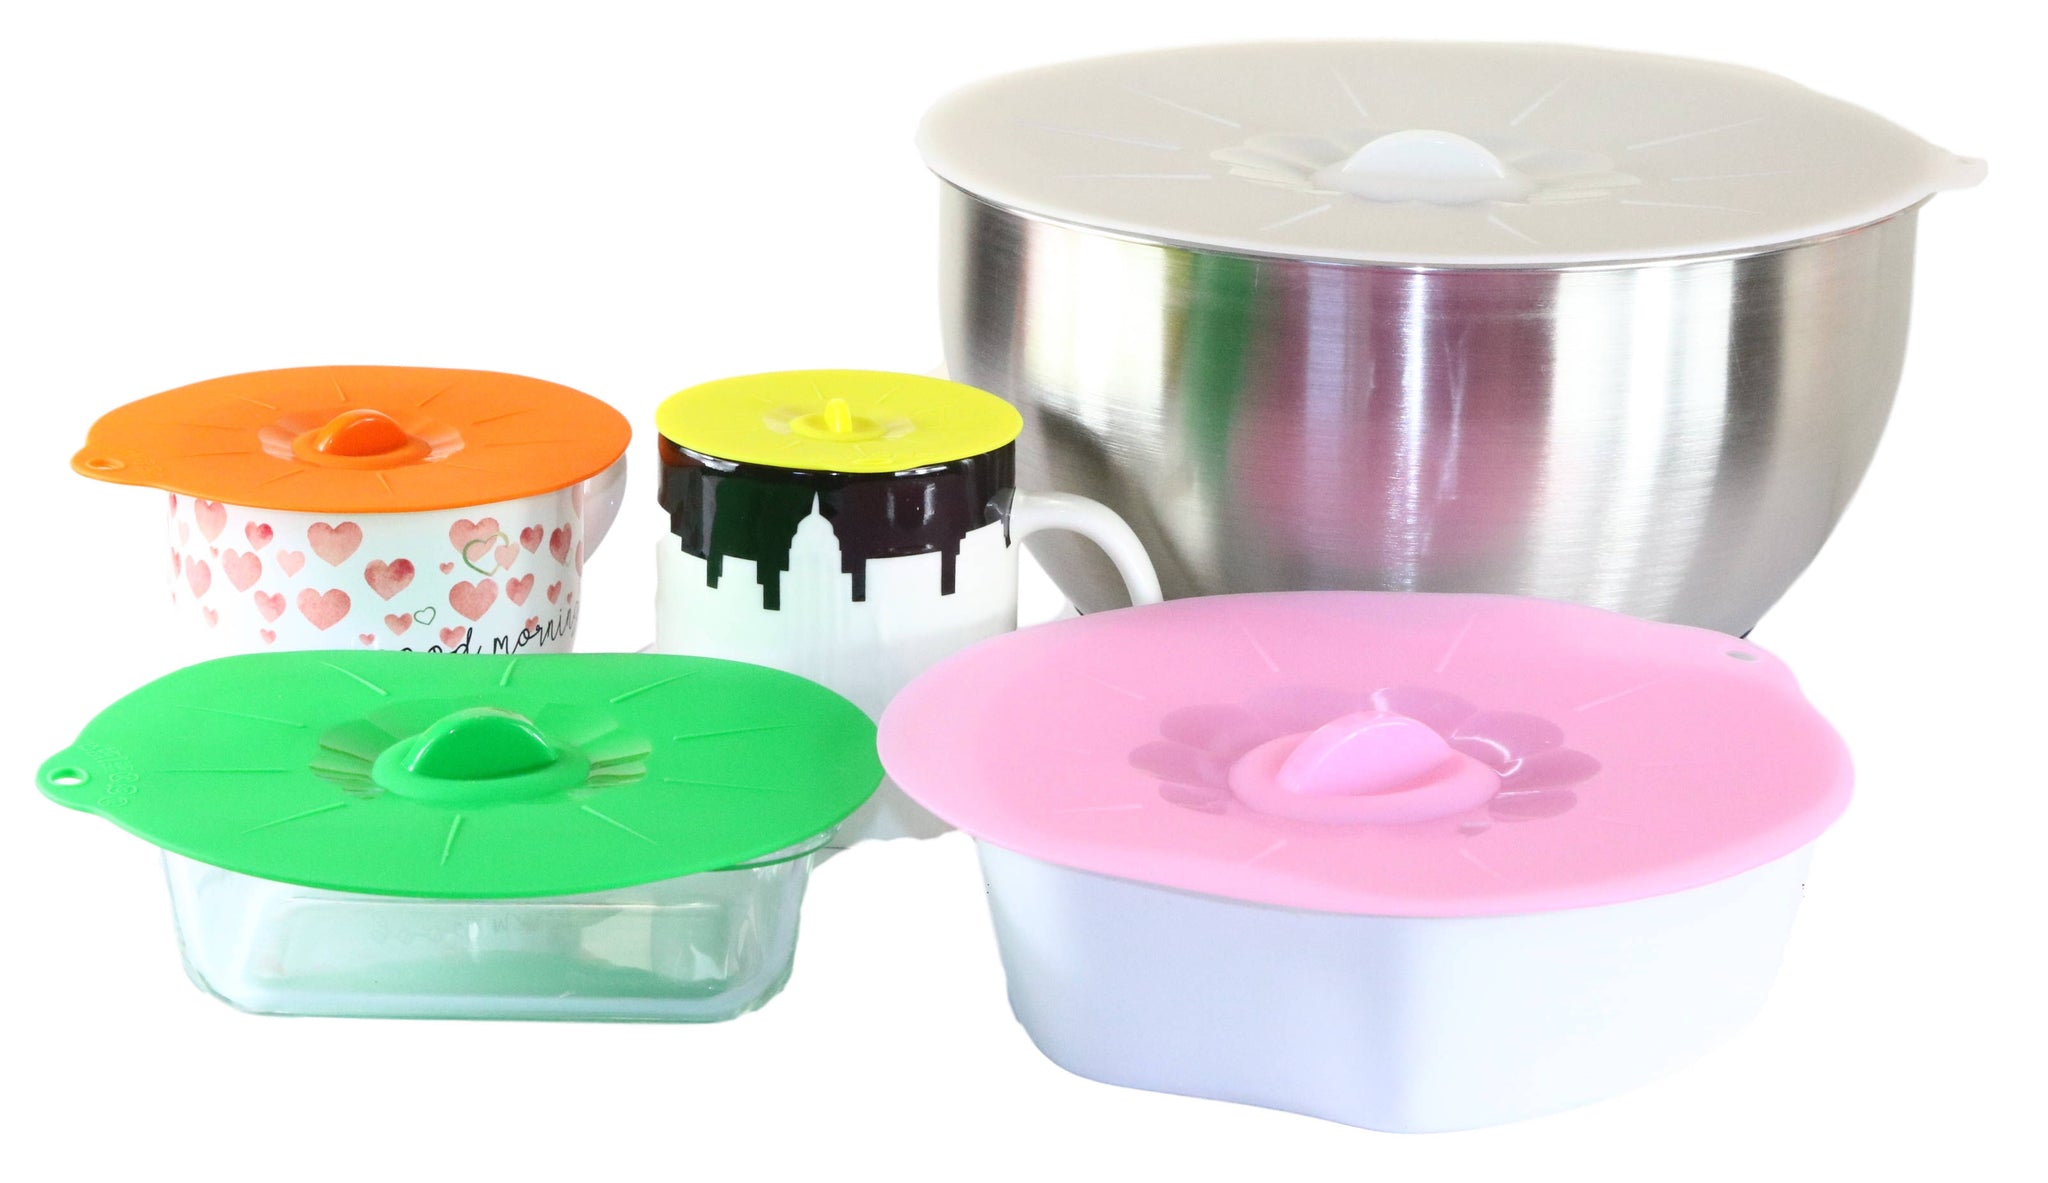 Kitchen + Home Silicone Stretch Lids - Set of 6 Silicone Food Saver Covers  - BPA Free, Dishwasher, Microwave, & Oven Safe